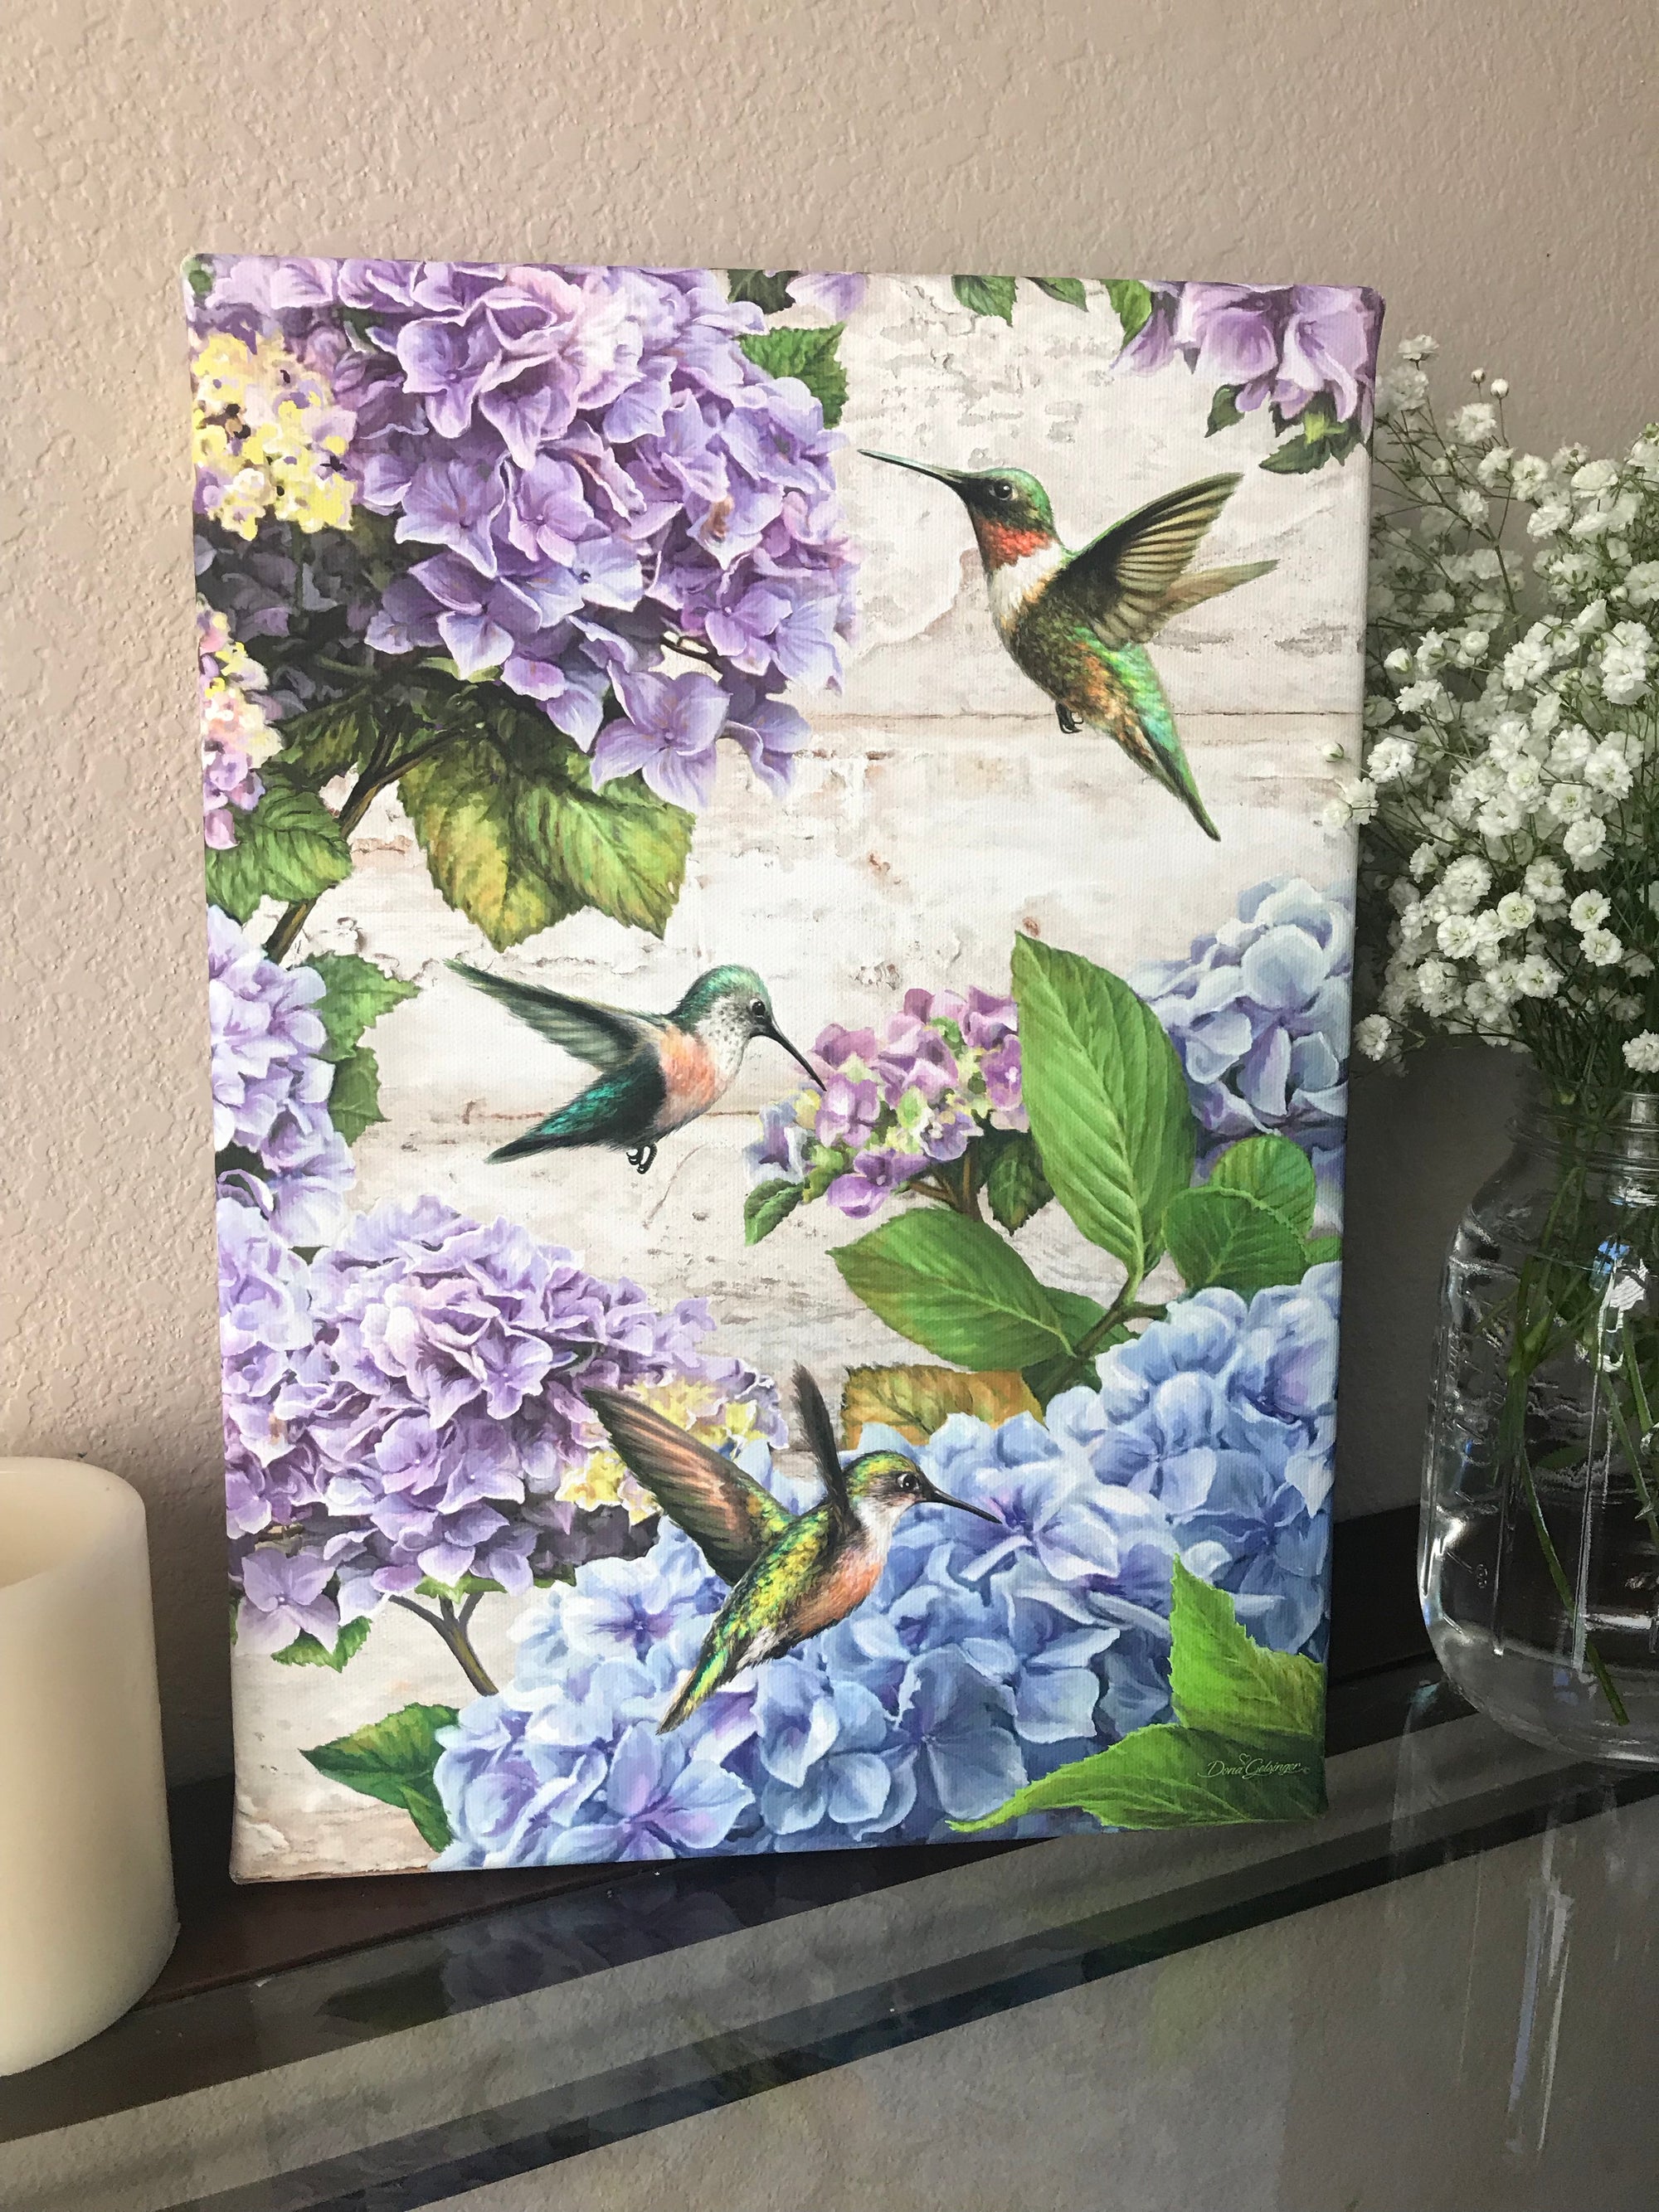 Indulge in the beauty of nature's most enchanting creatures with our Hummingbirds and Hydrangeas Canvas Wall Art. This stunning piece showcases vibrant purple and blue hydrangeas that serve as a delectable feast for the delightful hummingbirds.  The intricate details of the hummingbirds' wings and feathers are captured in breathtaking clarity.